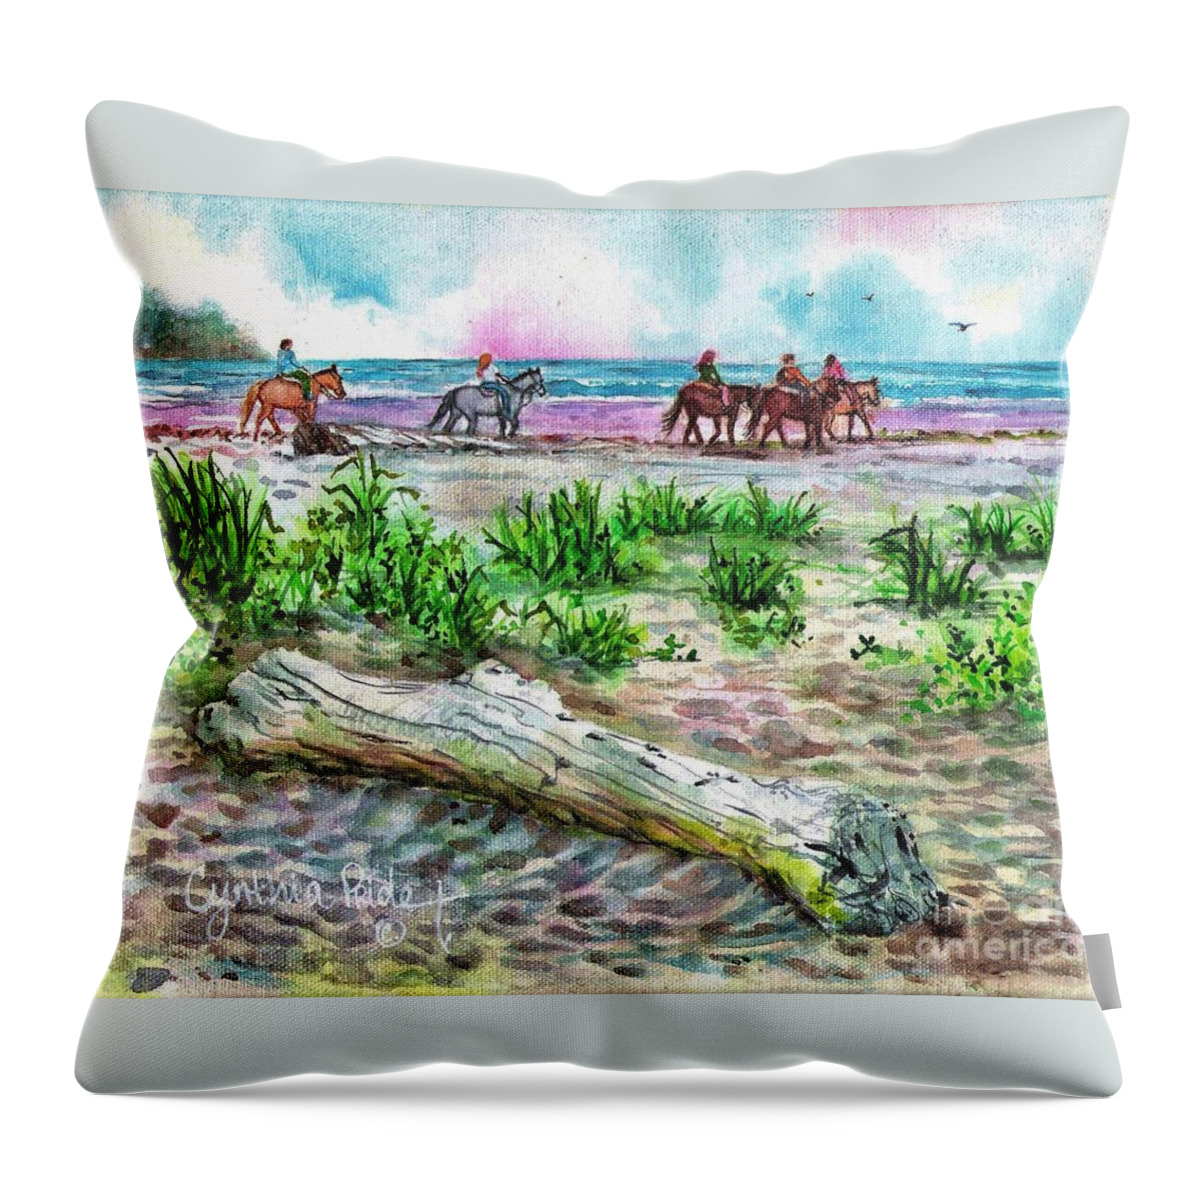 Beachscape #4 Throw Pillow featuring the painting Beach Horseback Riding by Cynthia Pride